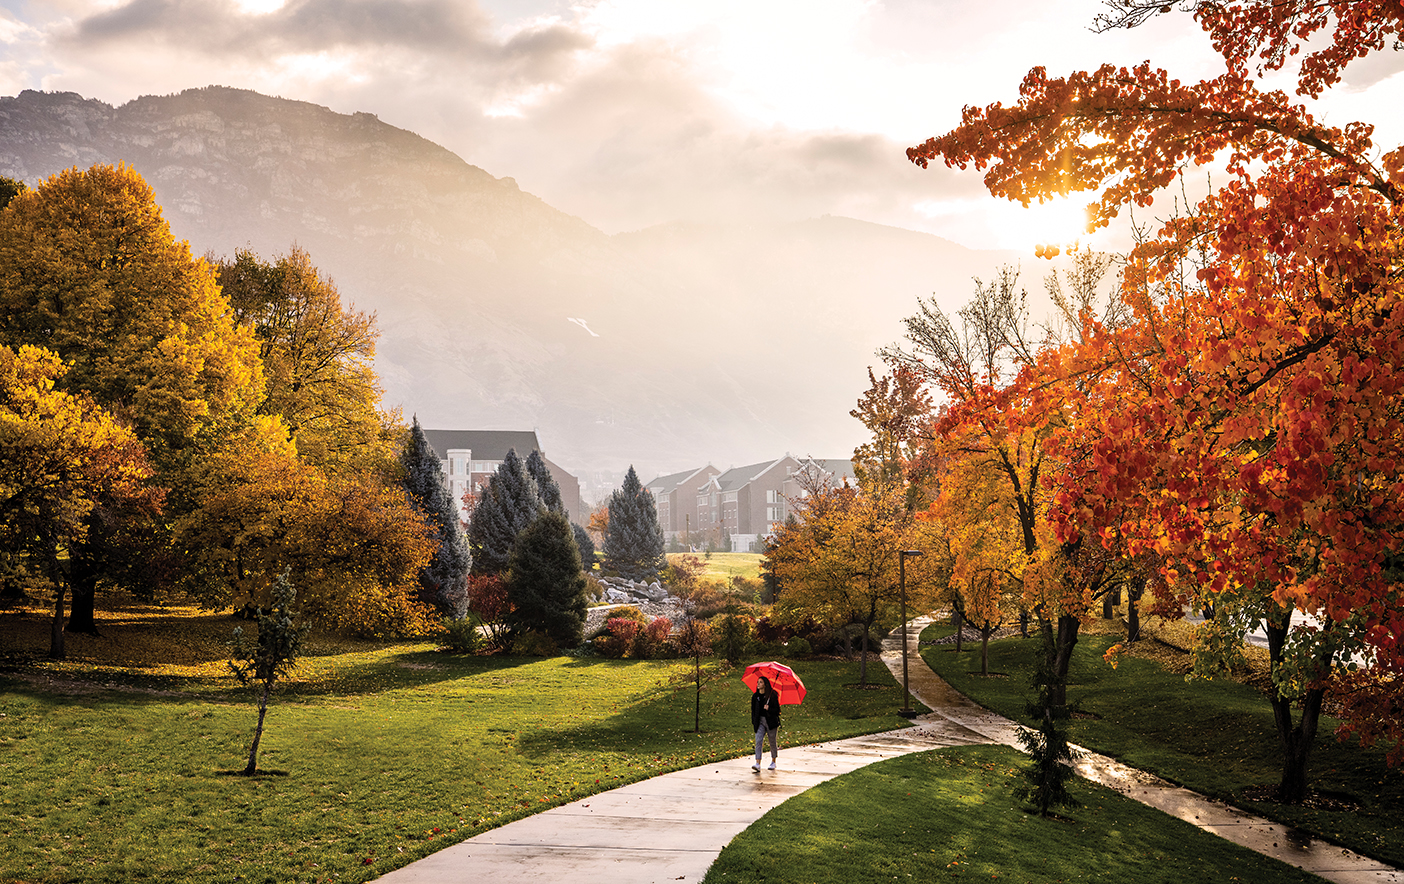 A student walks on BYU campus carrying a red umbrella. The mountains behind her are foggy, and the photo is framed by trees with red and yellow leaves.